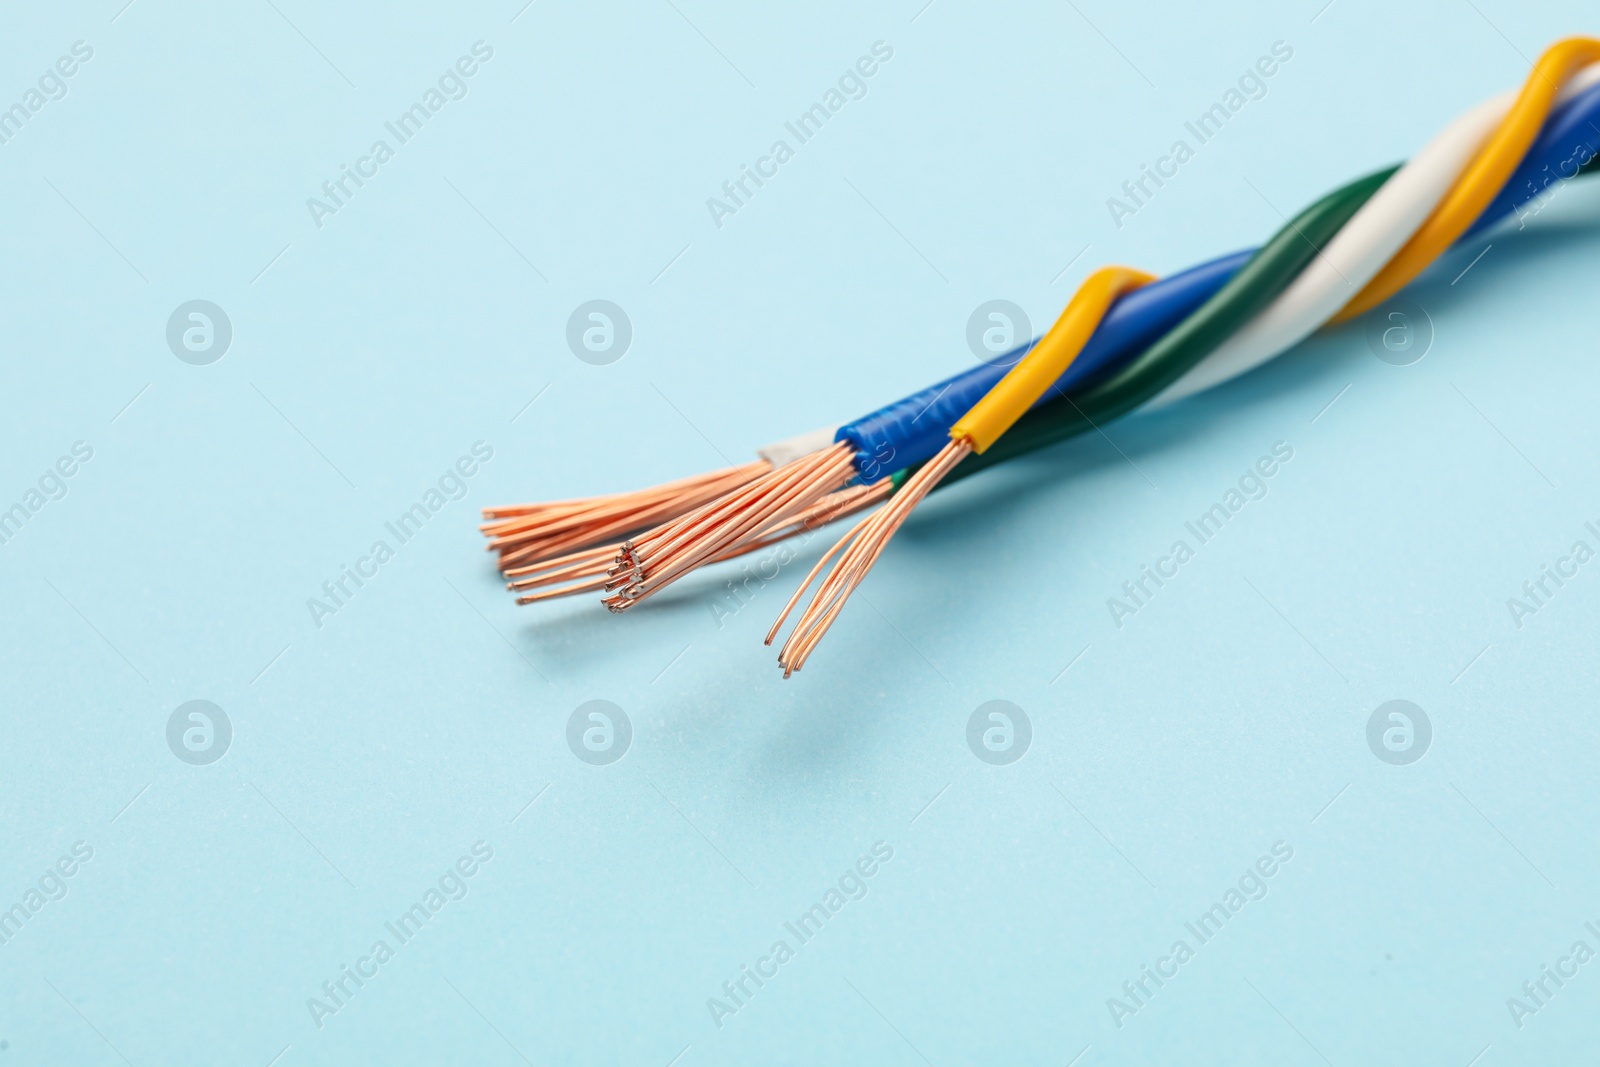 Photo of Many stripped electrical wires on light blue background, closeup